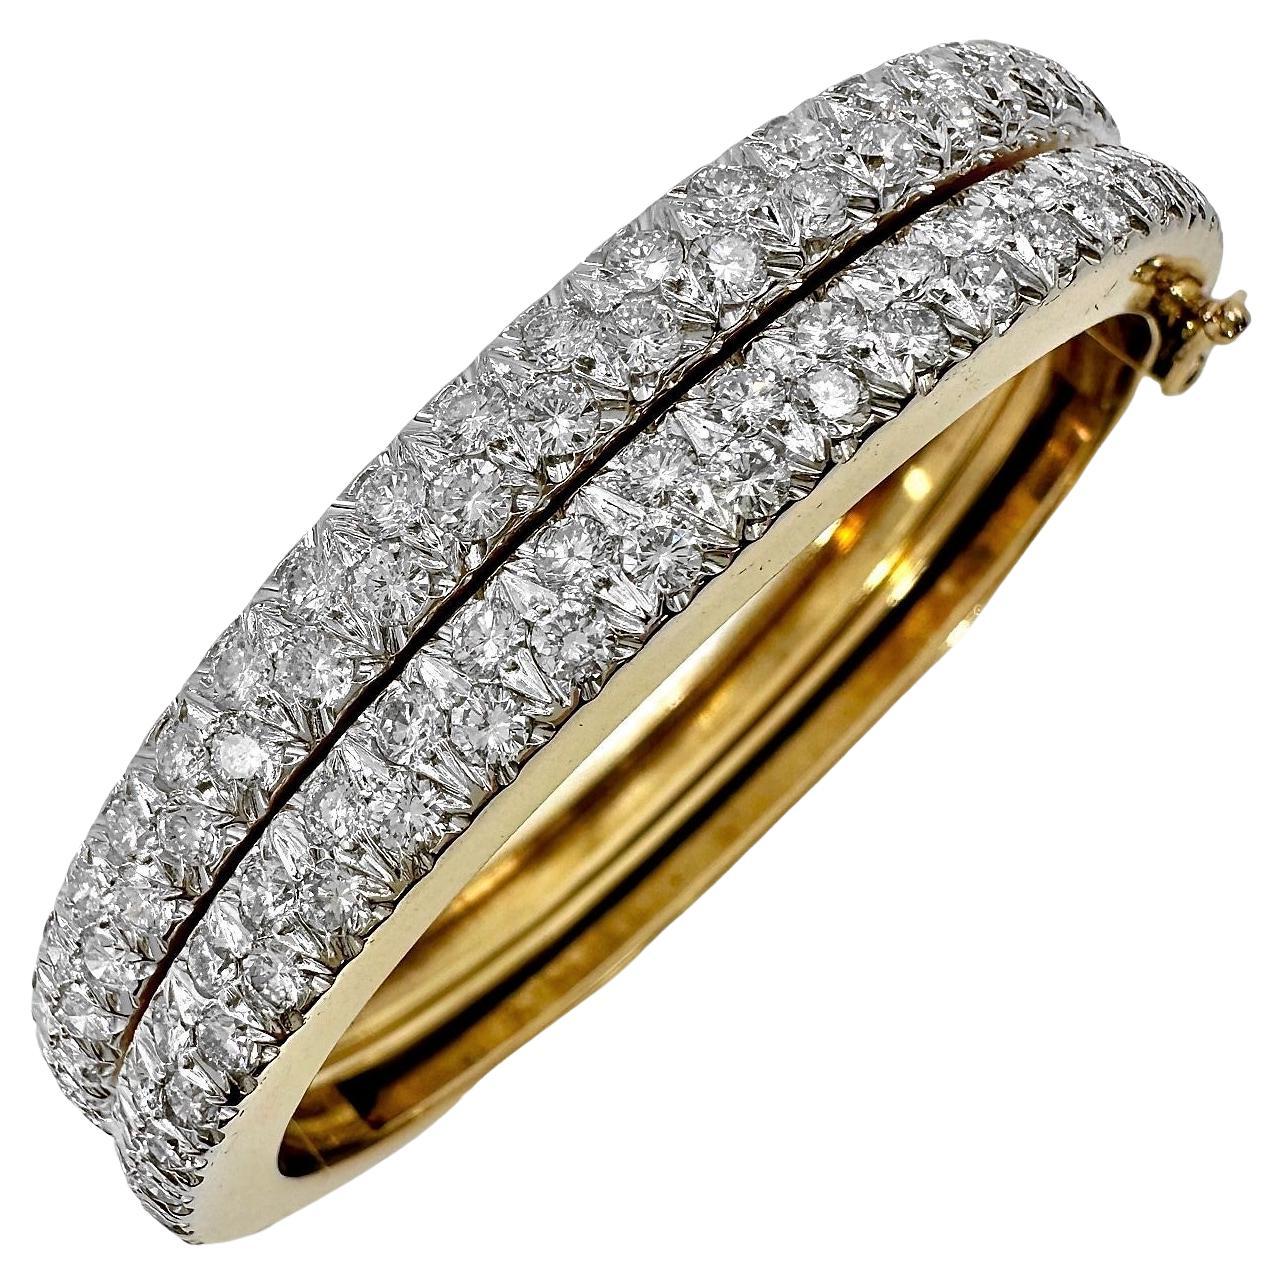 Pair of 14k Yellow Gold Oval Bangles with Pave Diamonds on across the Top For Sale